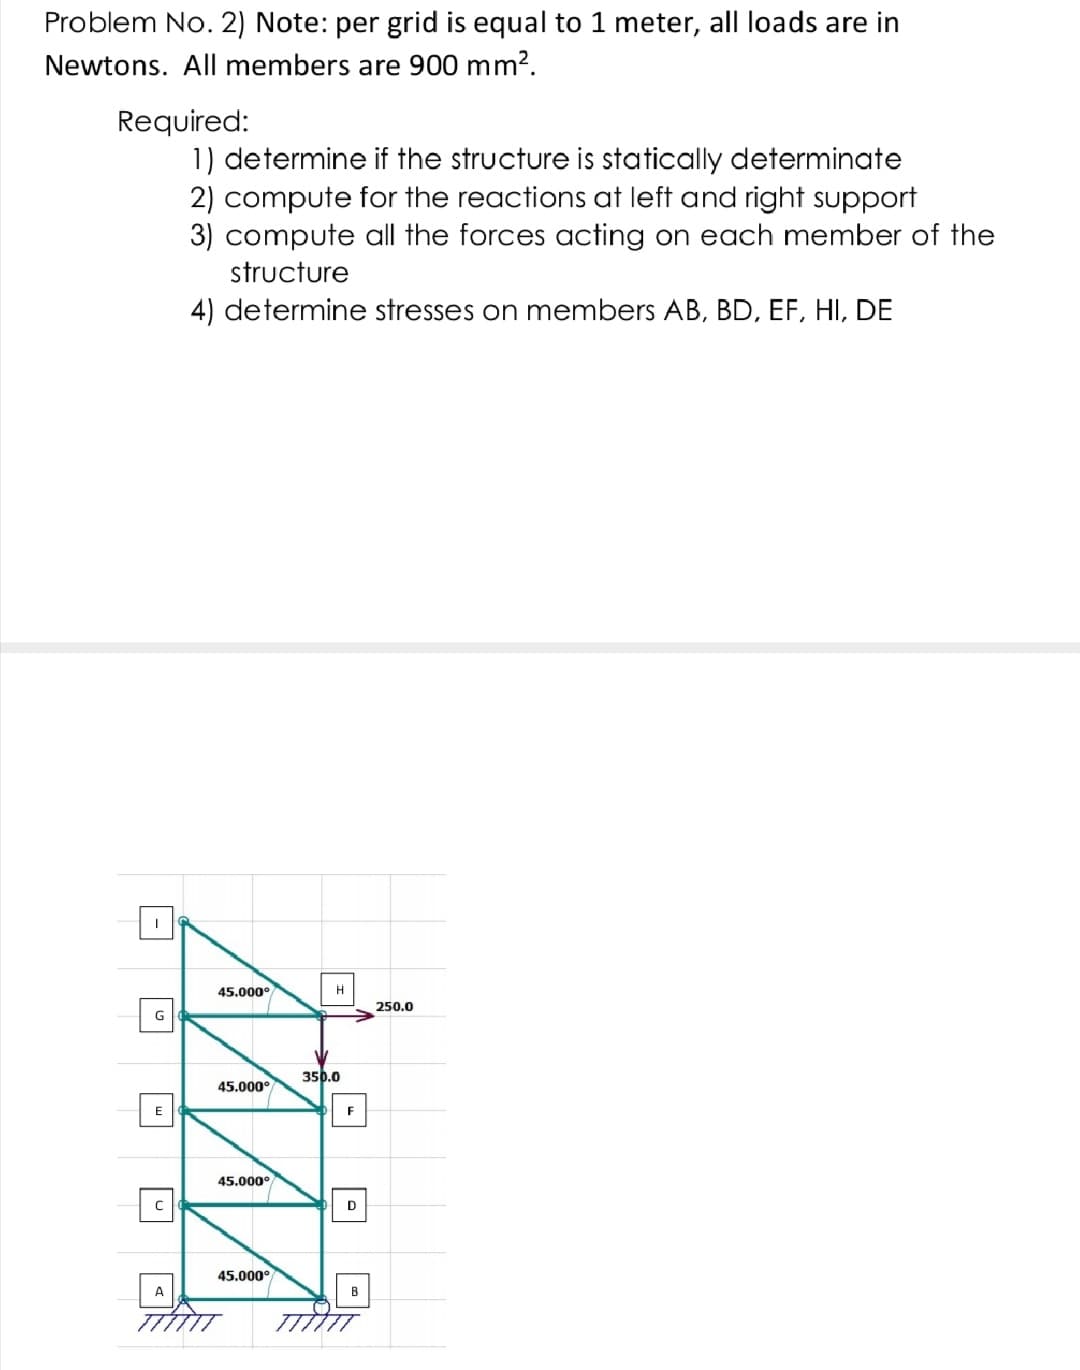 Problem No. 2) Note: per grid is equal to 1 meter, all loads are in
Newtons. All members are 900 mm?.
Required:
1) determine if the structure is statically determinate
2) compute for the reactions at left and right support
3) compute all the forces acting on each member of the
structure
4) determine stresses on members AB, BD, EF, HI, DE
45.000°
H
250.0
350.0
45.000°
E
F
45.000°
D
45.000°
A
B
|-|
